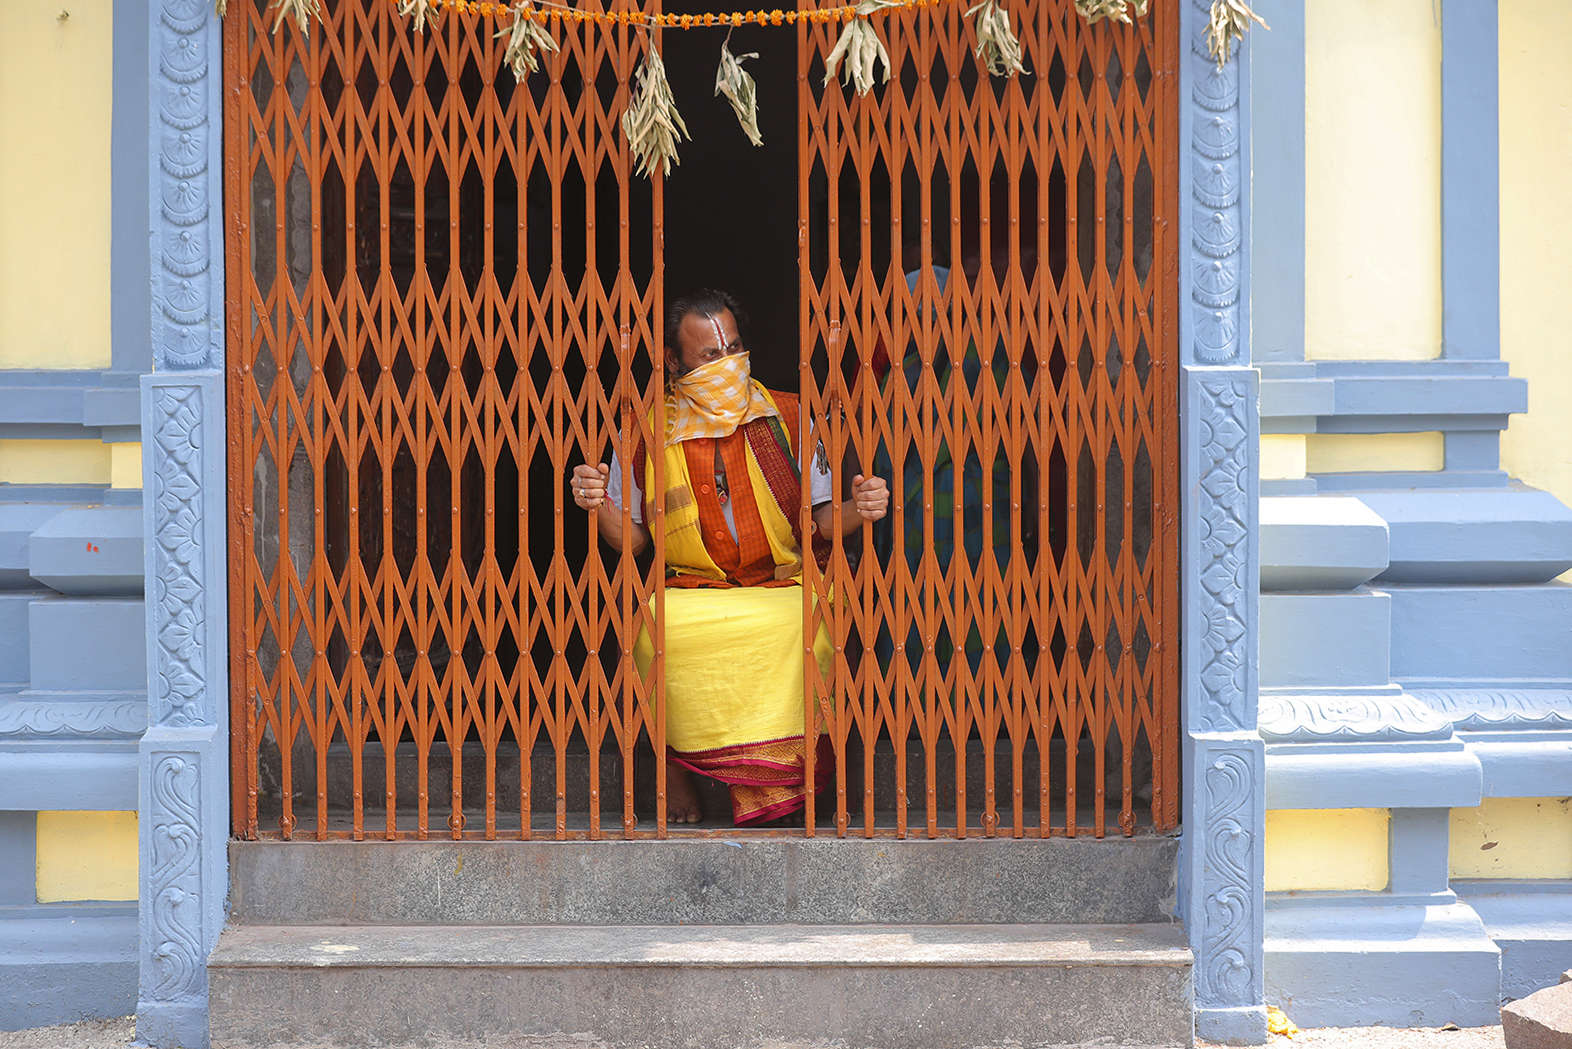 A Hindu priest looks out from a temple during lockdown to prevent the spread of new coronavirus in Hyderabad, India, Tuesday, April 14, 2020. Indian Prime Minister Narendra Modi on Tuesday extended the world's largest coronavirus lockdown to head off the epidemic's peak, with officials racing to make up for lost time. (AP Photo/Mahesh Kumar A.)